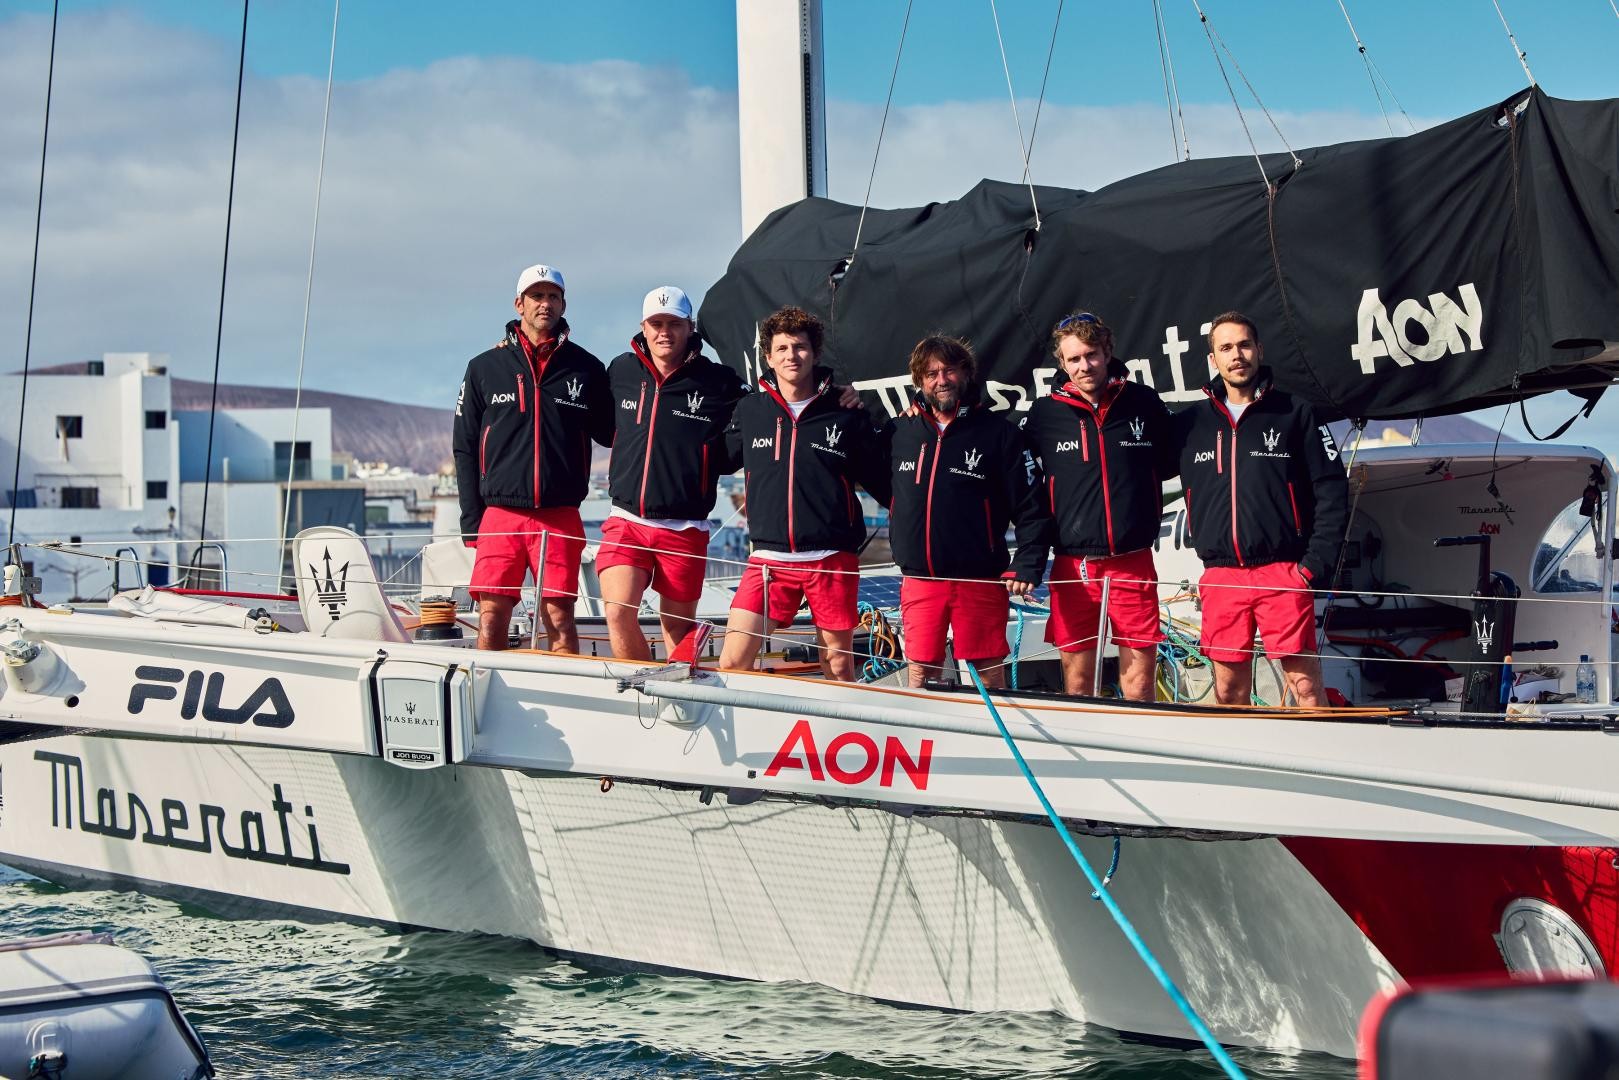 Less than 24 hours to the start of the RORC Transatlantic Race